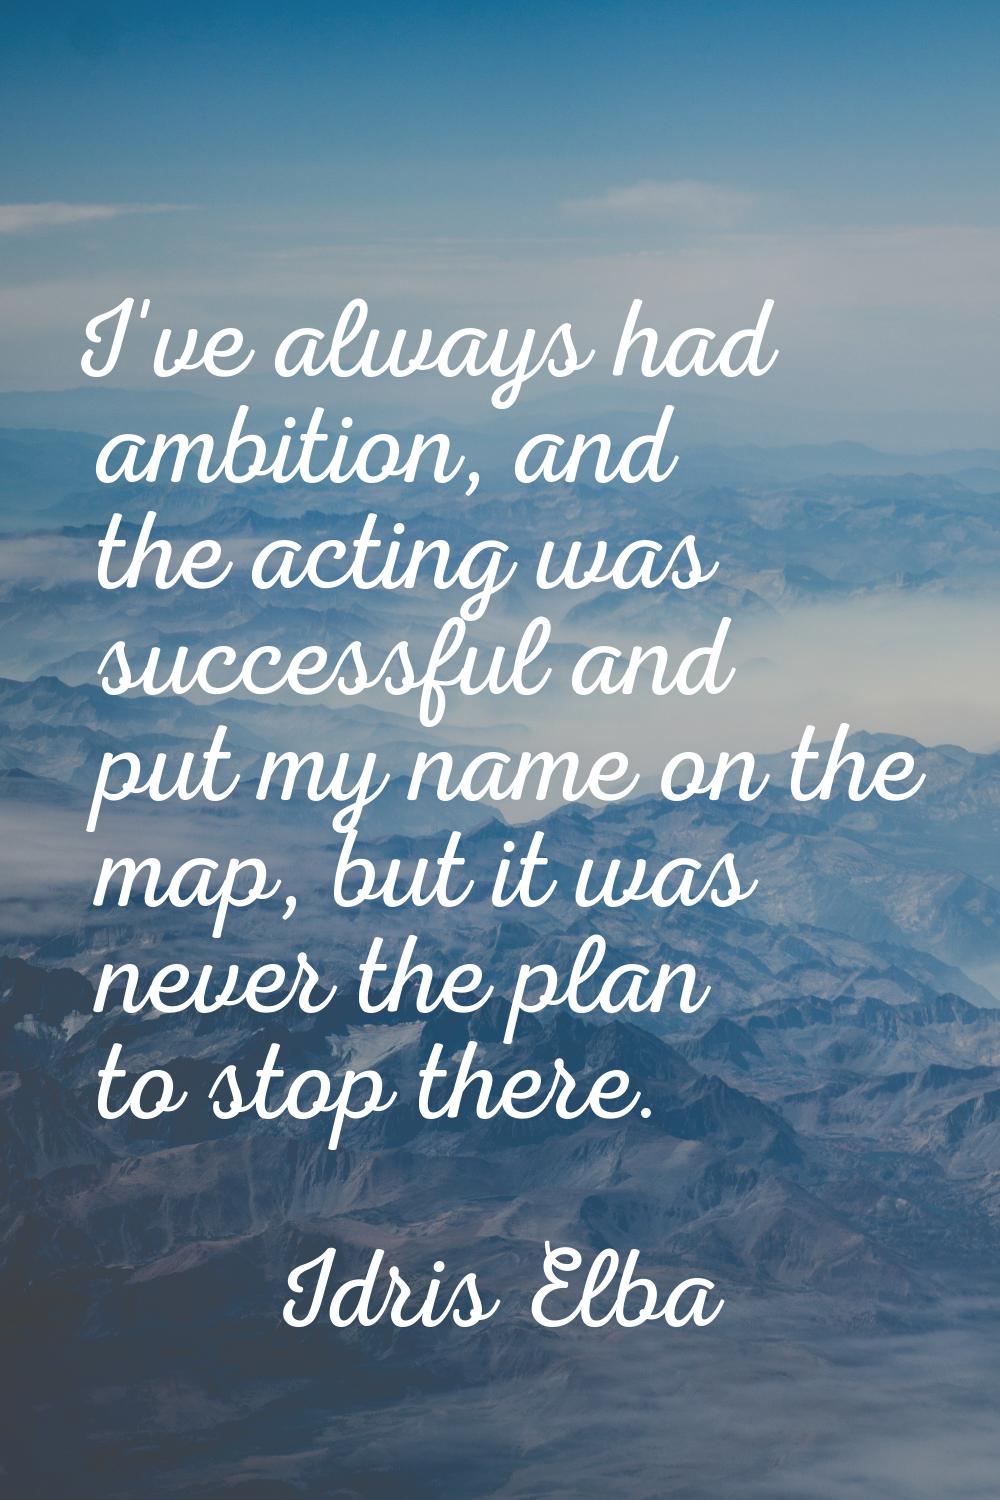 I've always had ambition, and the acting was successful and put my name on the map, but it was neve